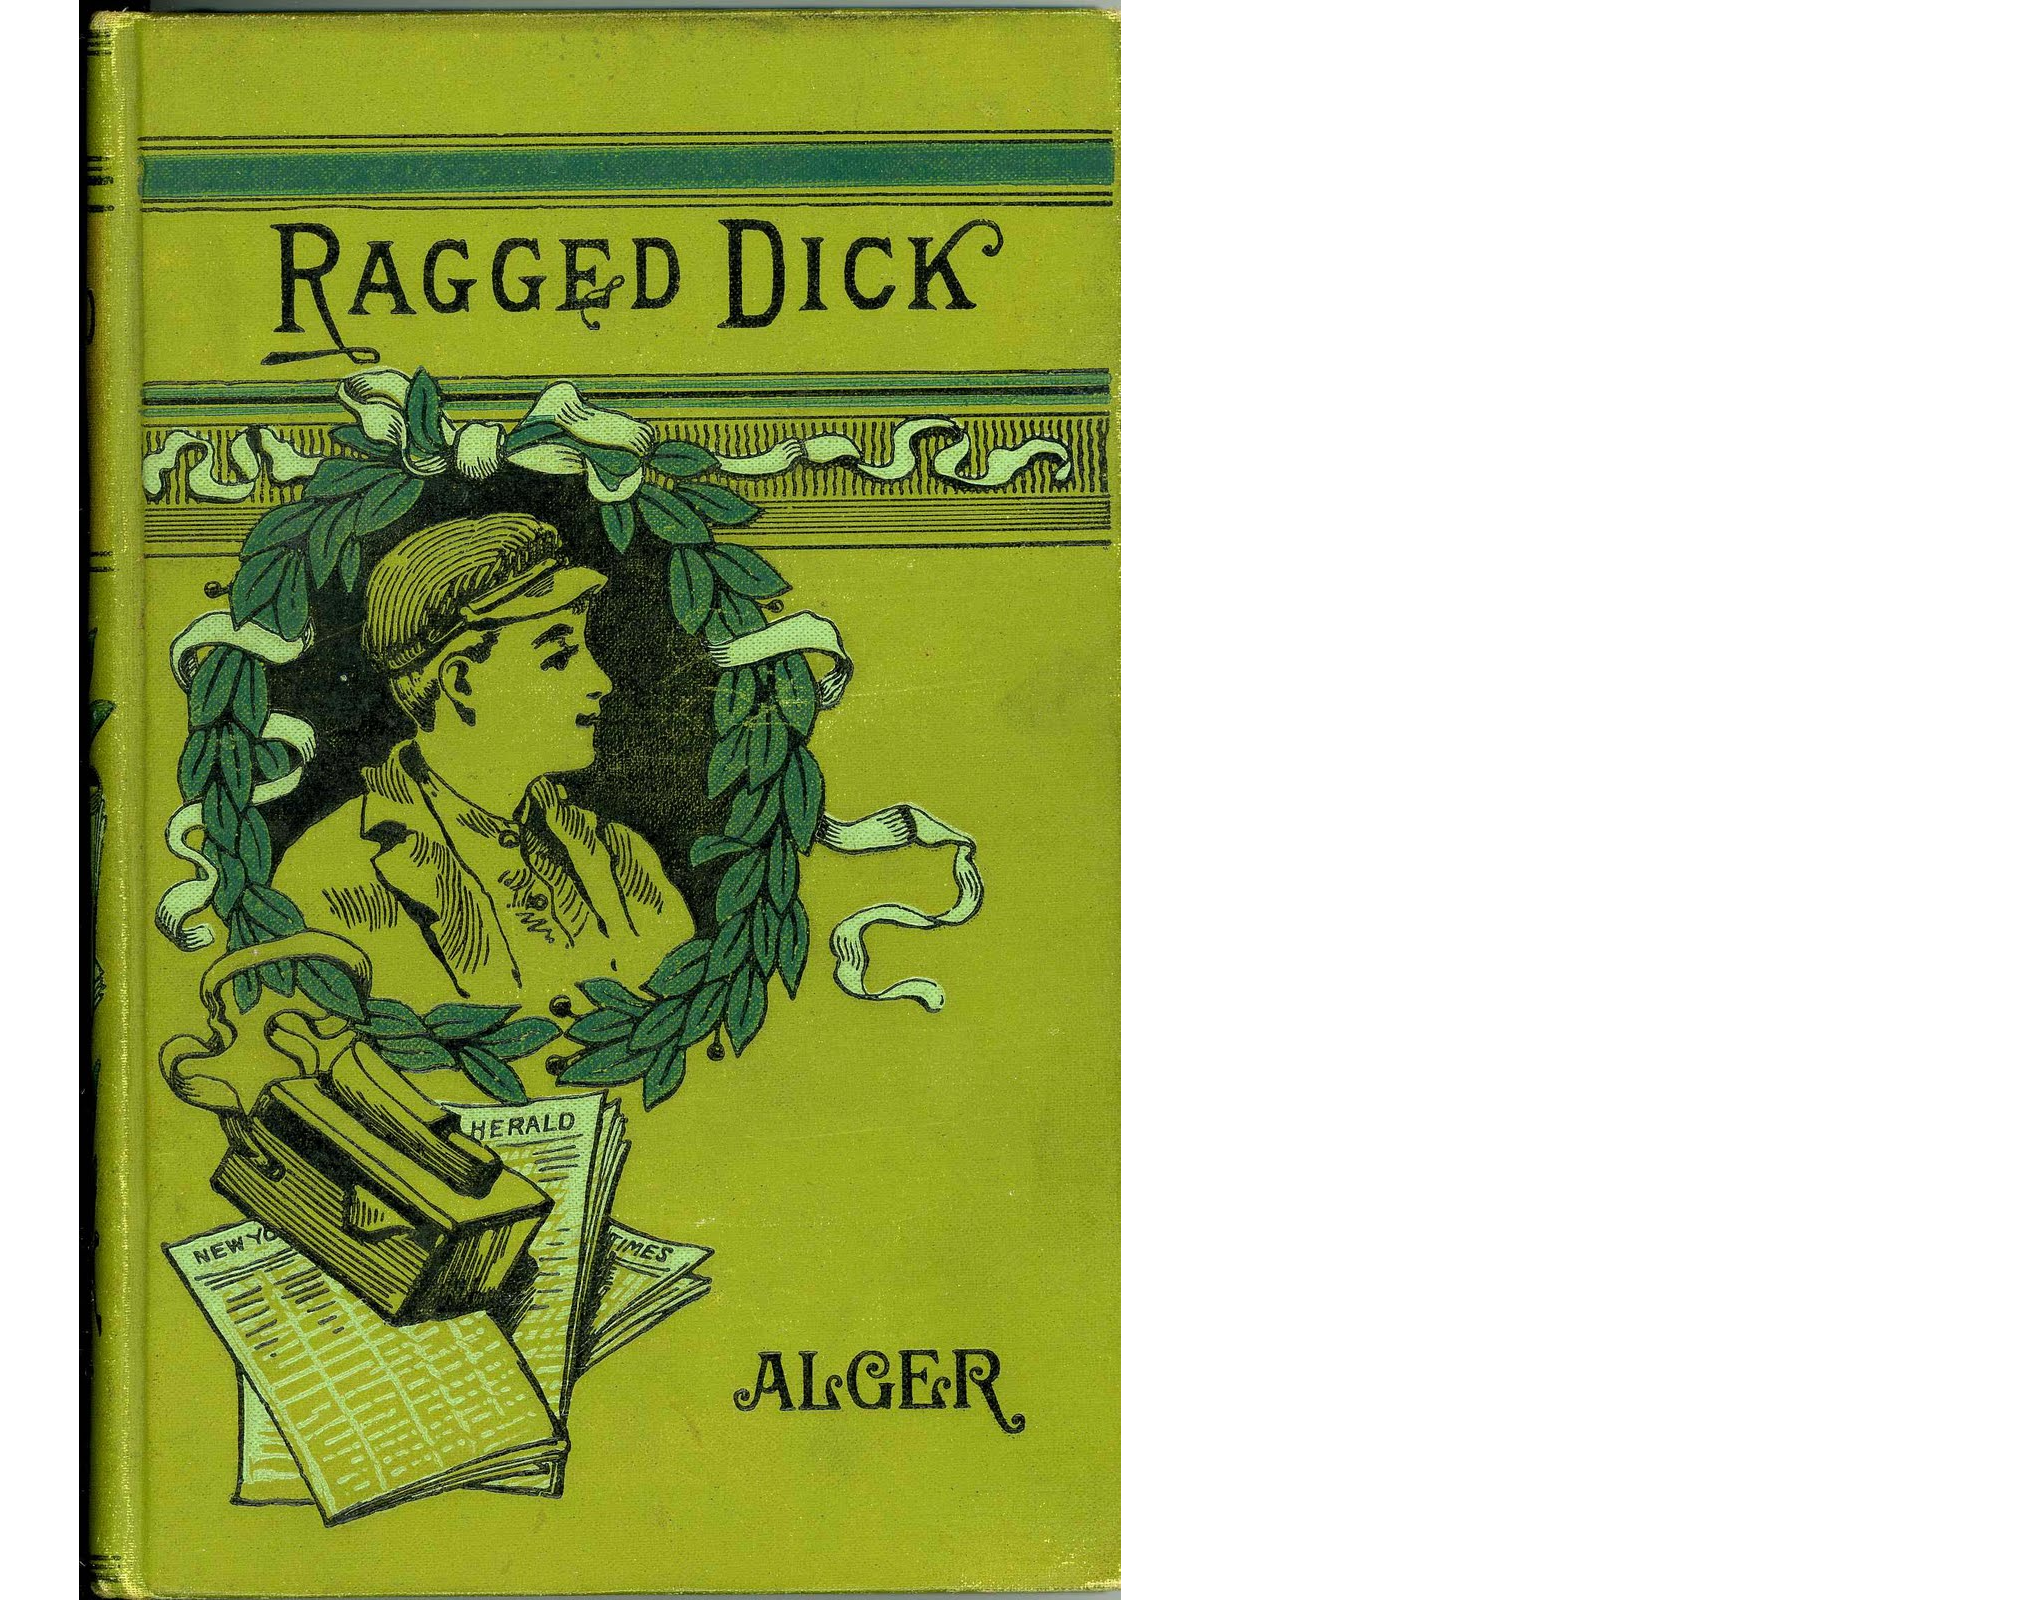 "Ragged Dick" by Horatio Alger Jr.